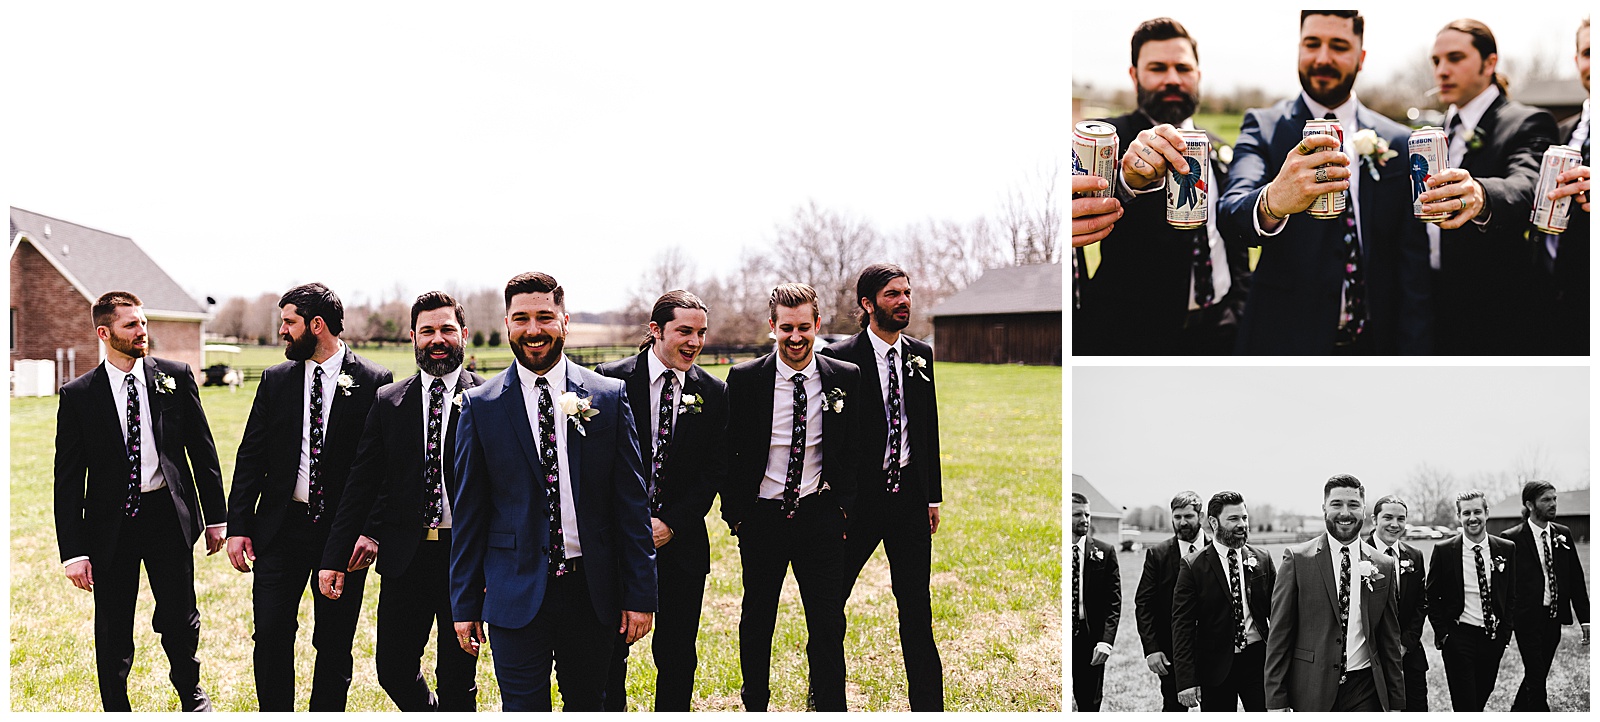 Groomsmen in eclectic chic attire, holding PBR